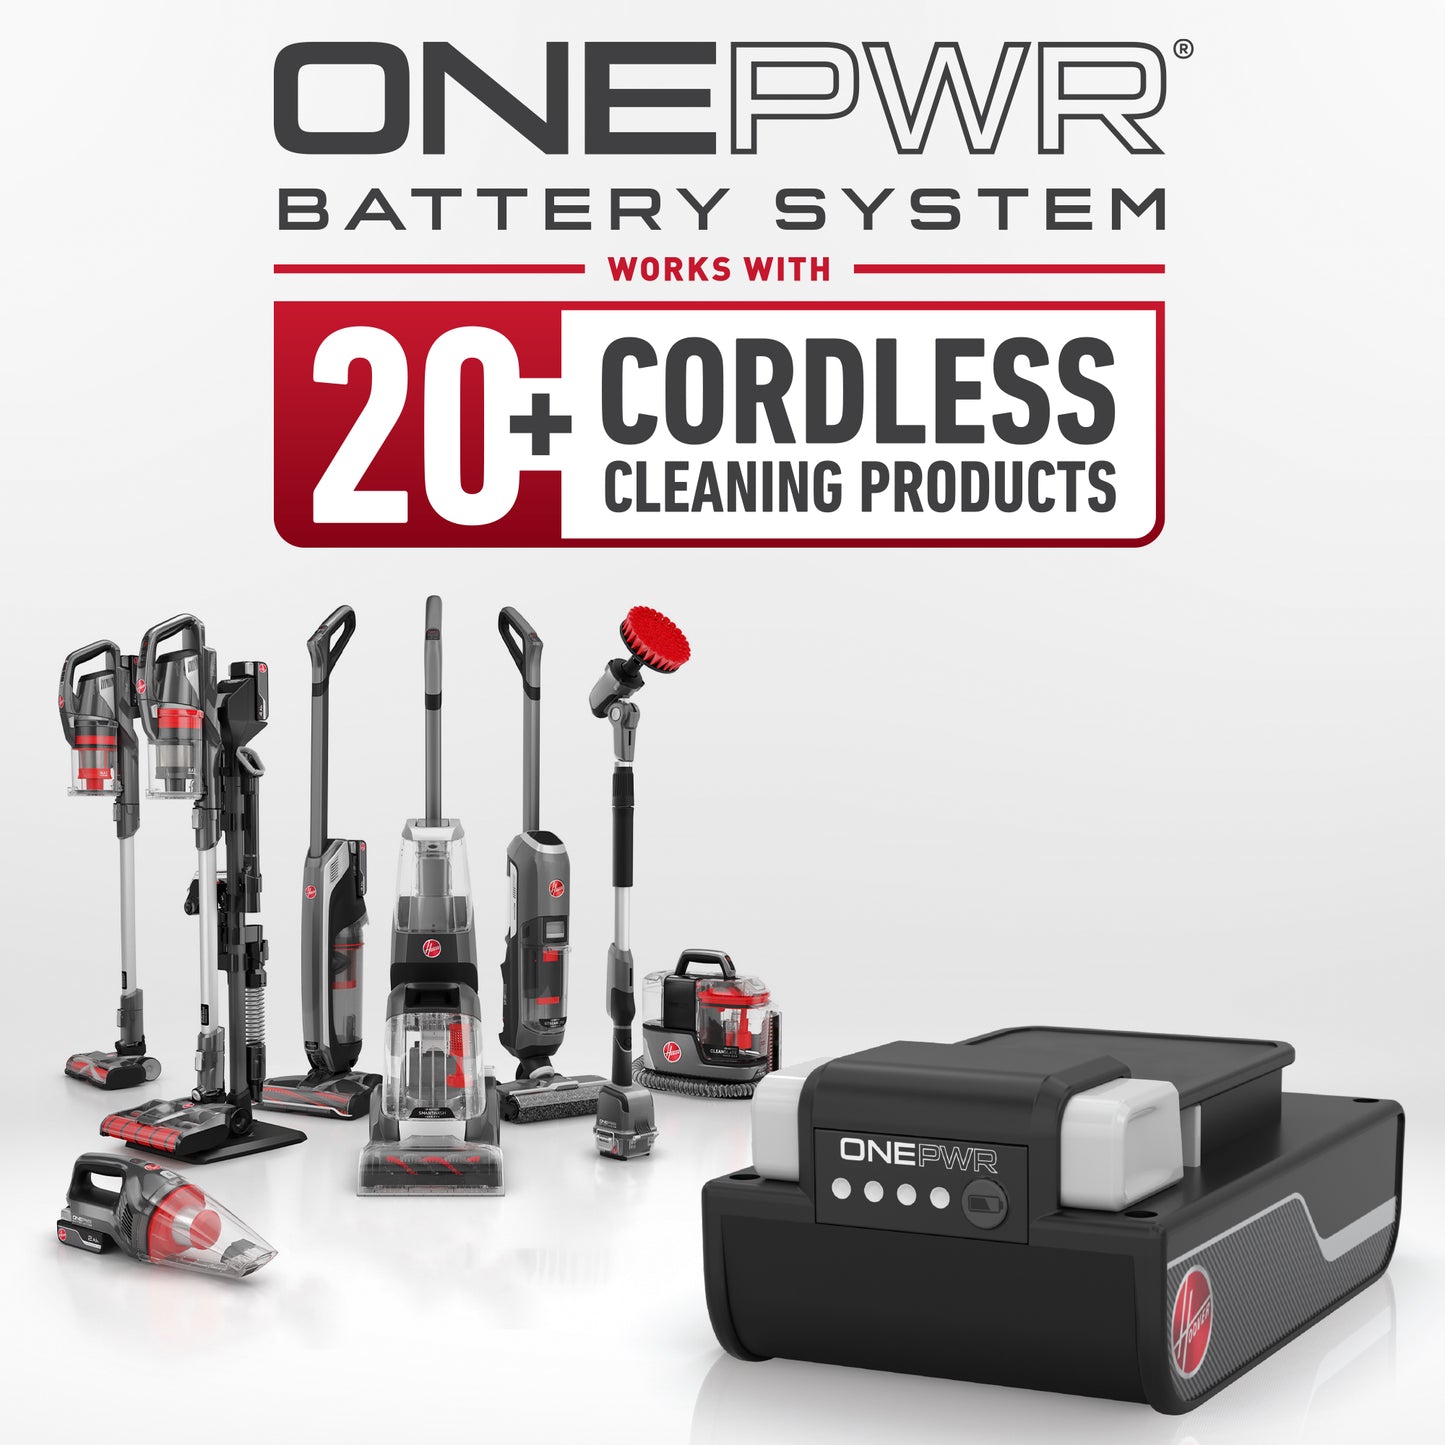 ONEPWR battery system compatible with over 20 cordless cleaning products, showcasing various Hoover cordless vacuum models and the interchangeable battery for versatile cleaning solutions 